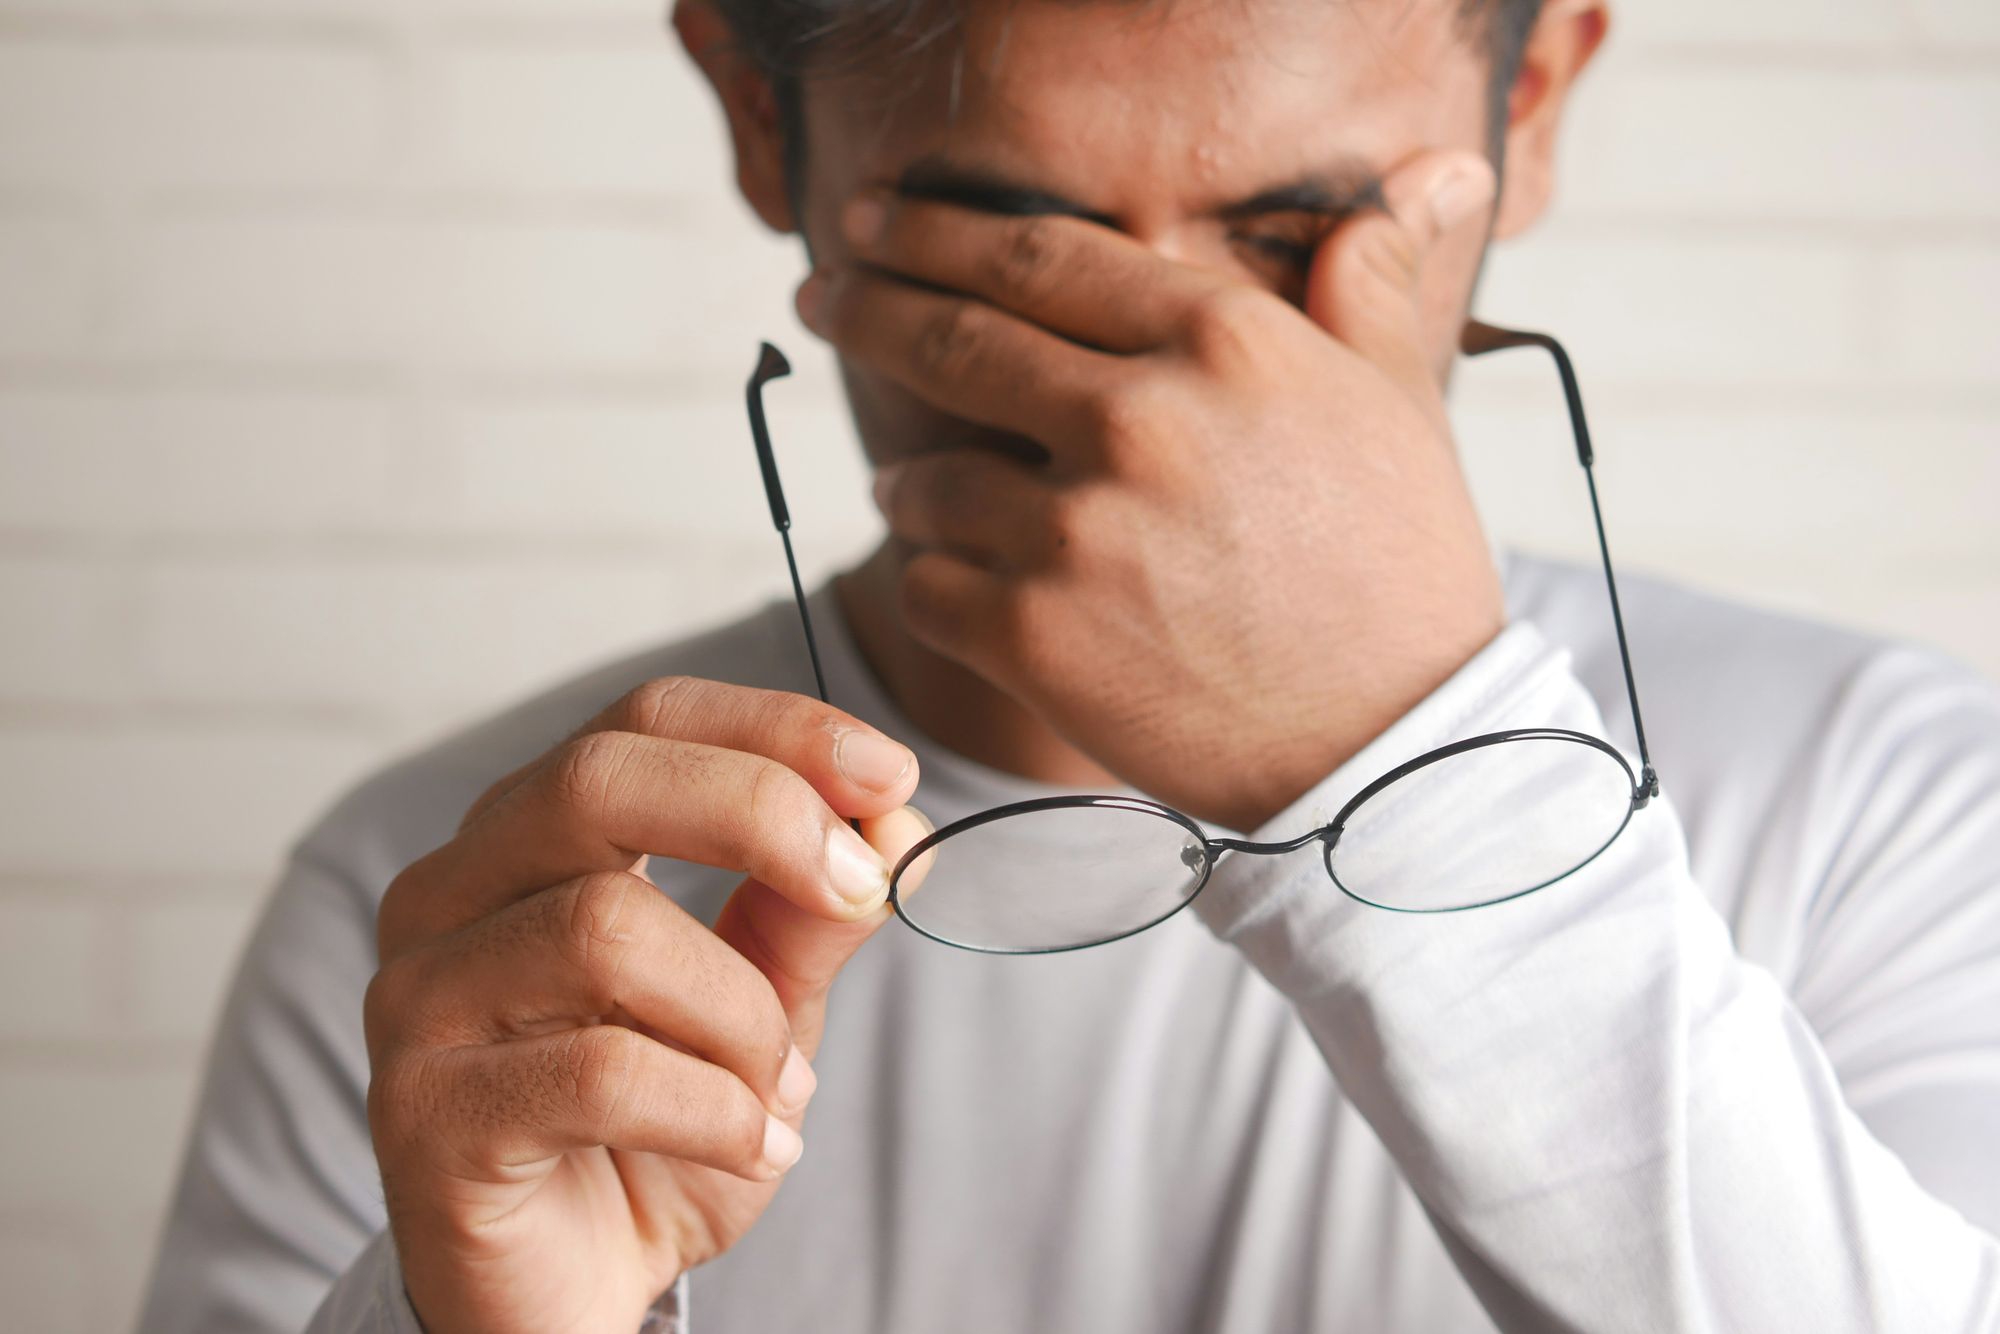 Man rubbing his eyes with glasses in his hand